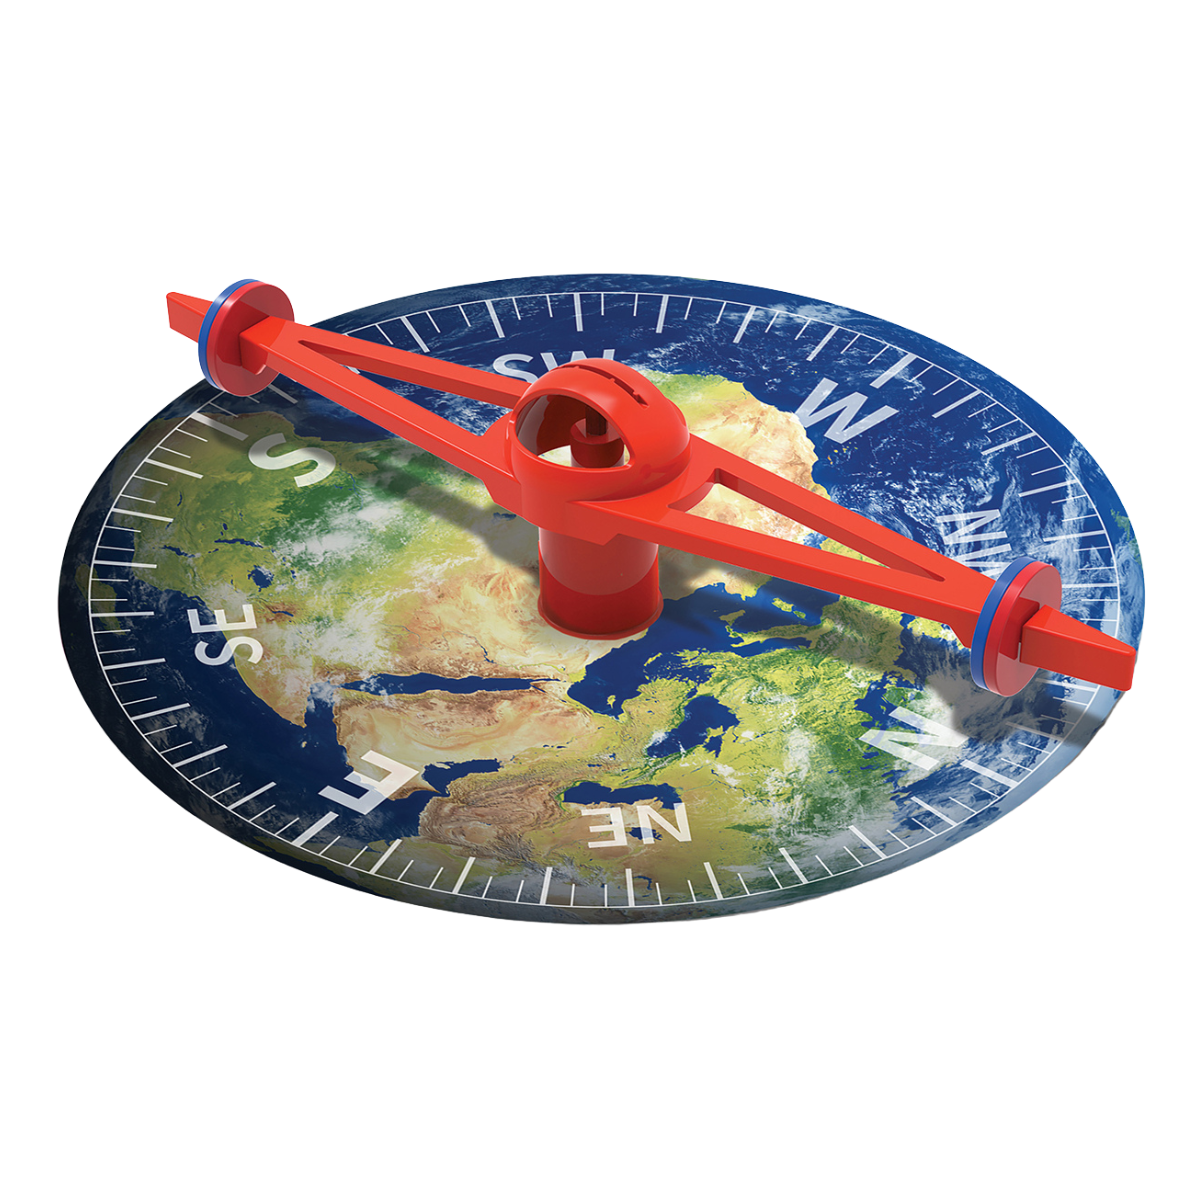 Giant Magnetic Compass KidzLabs